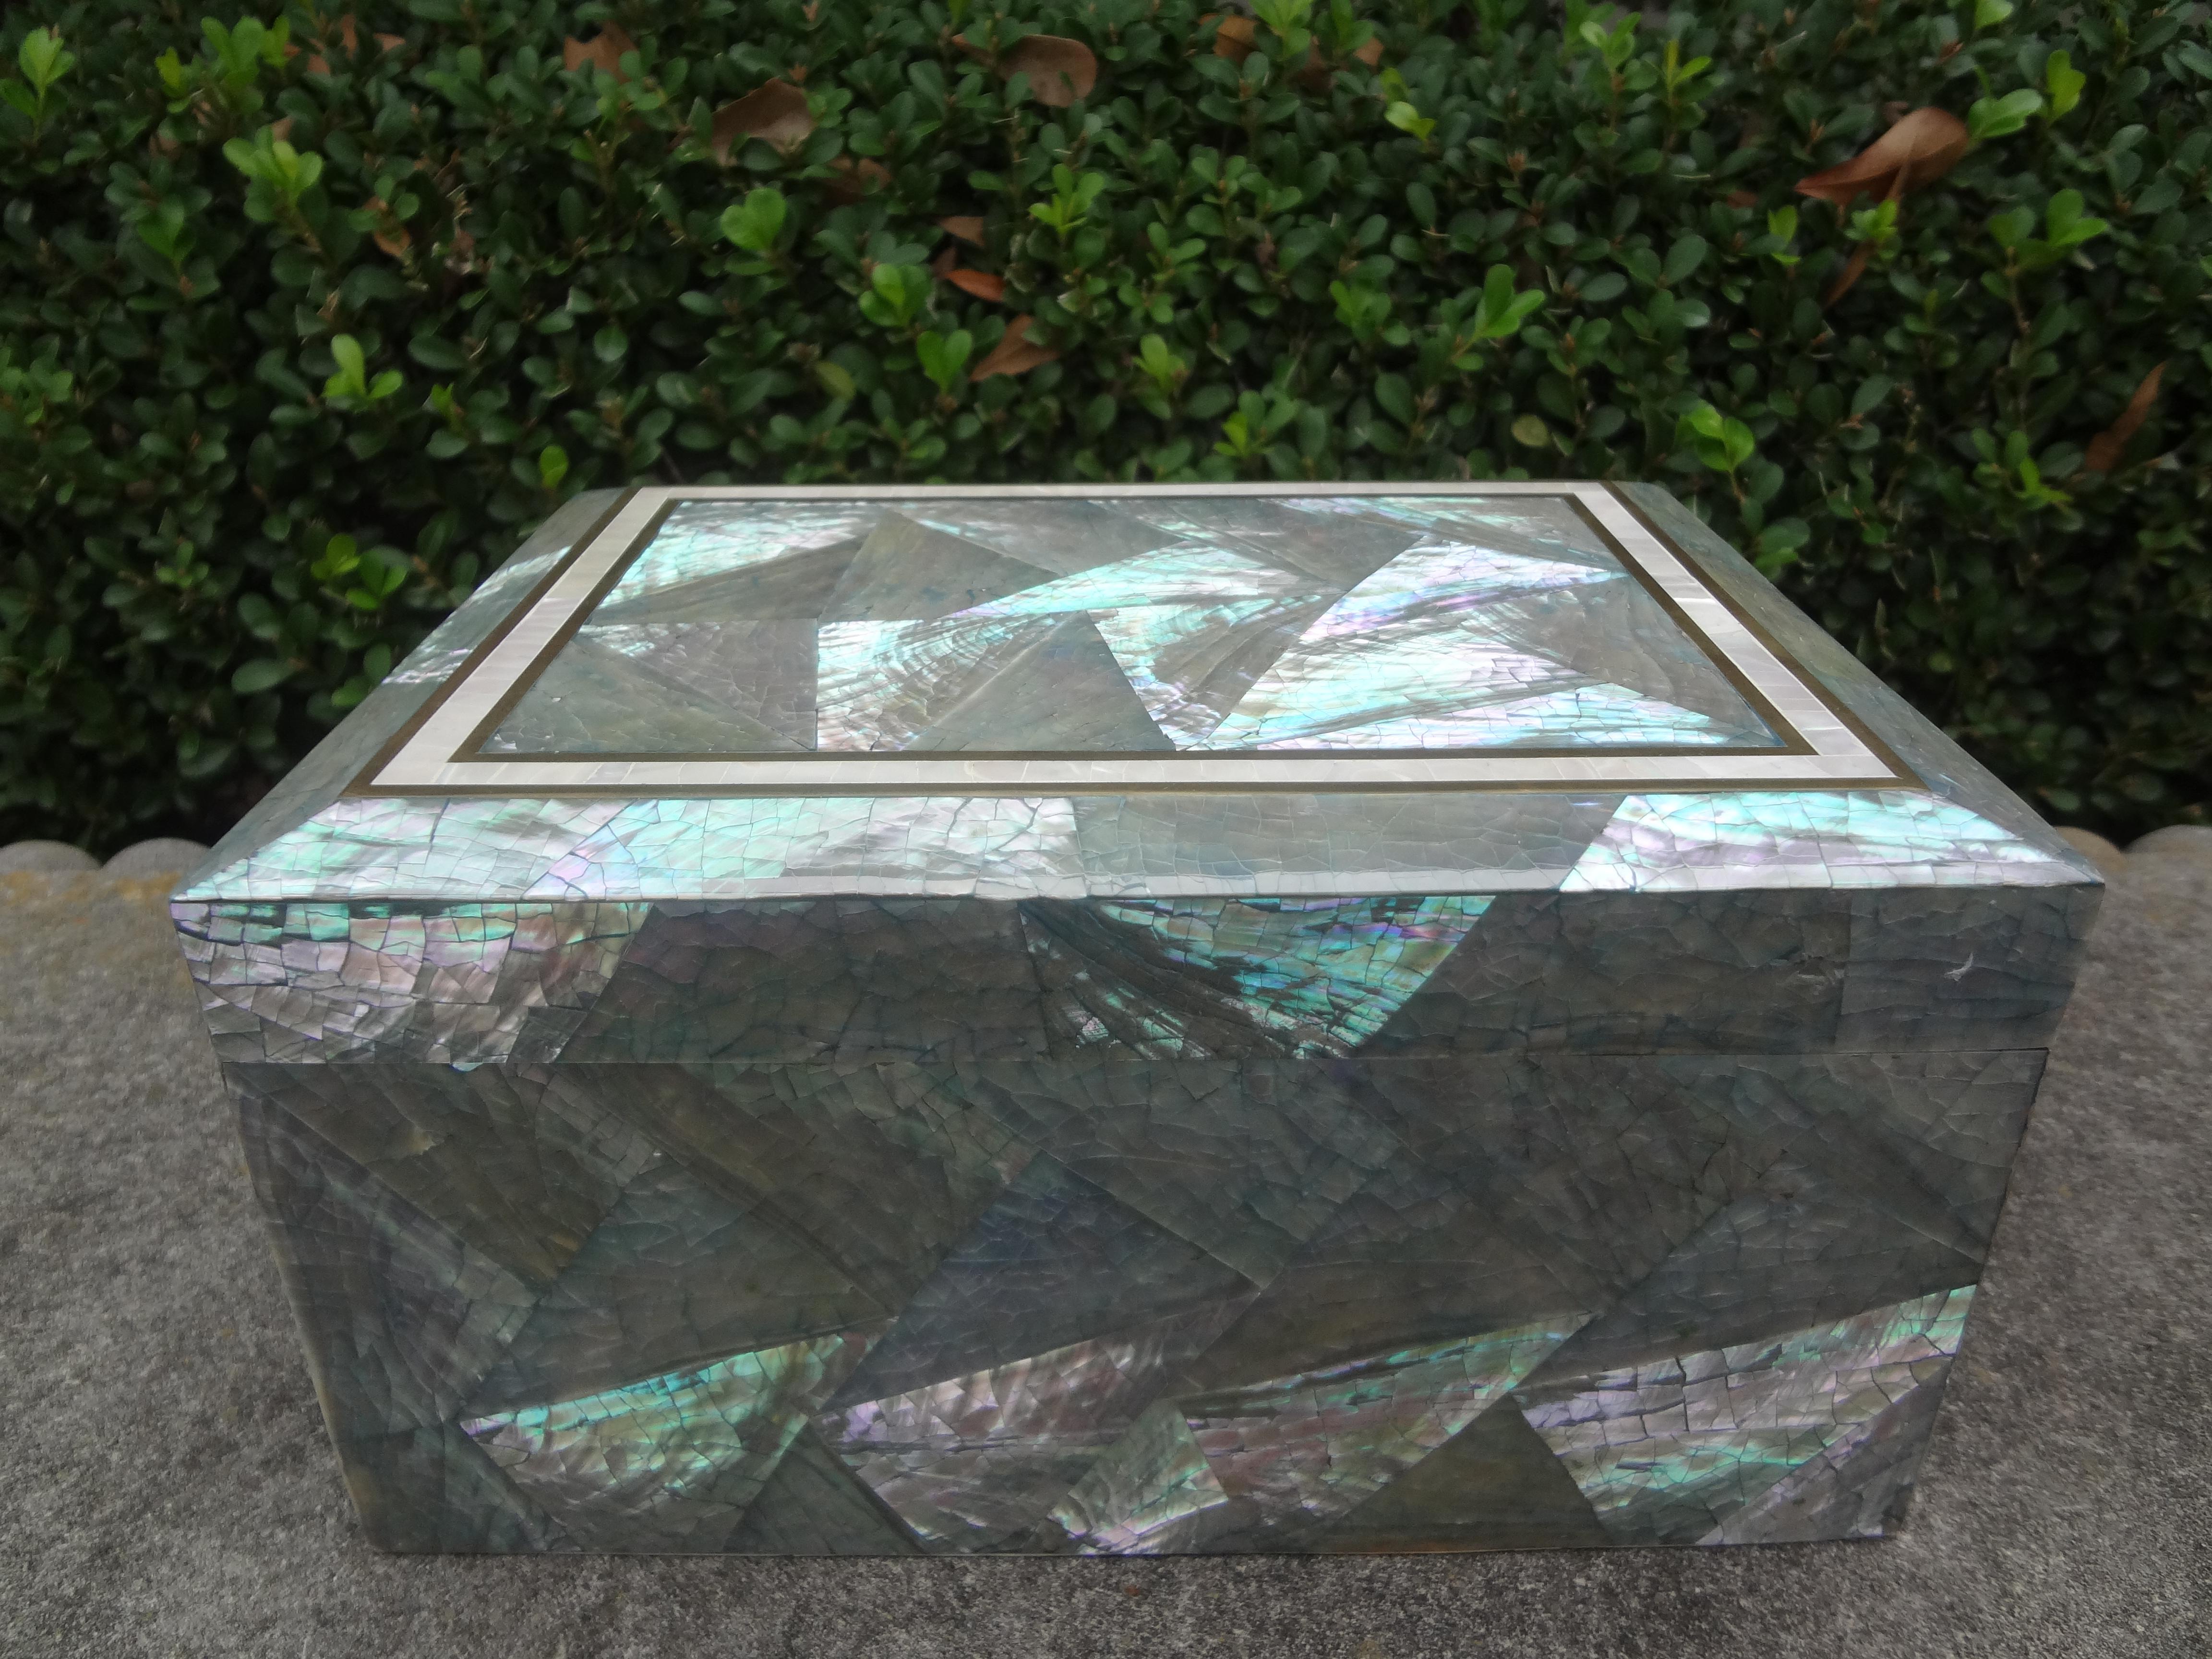 Vintage Maitland-Smith Abalone decorative box. This stunning Post Modern/Hollywood Regency Abalone shell box can be used as a decorative cocktail table box or jewelry box. Gorgeous!